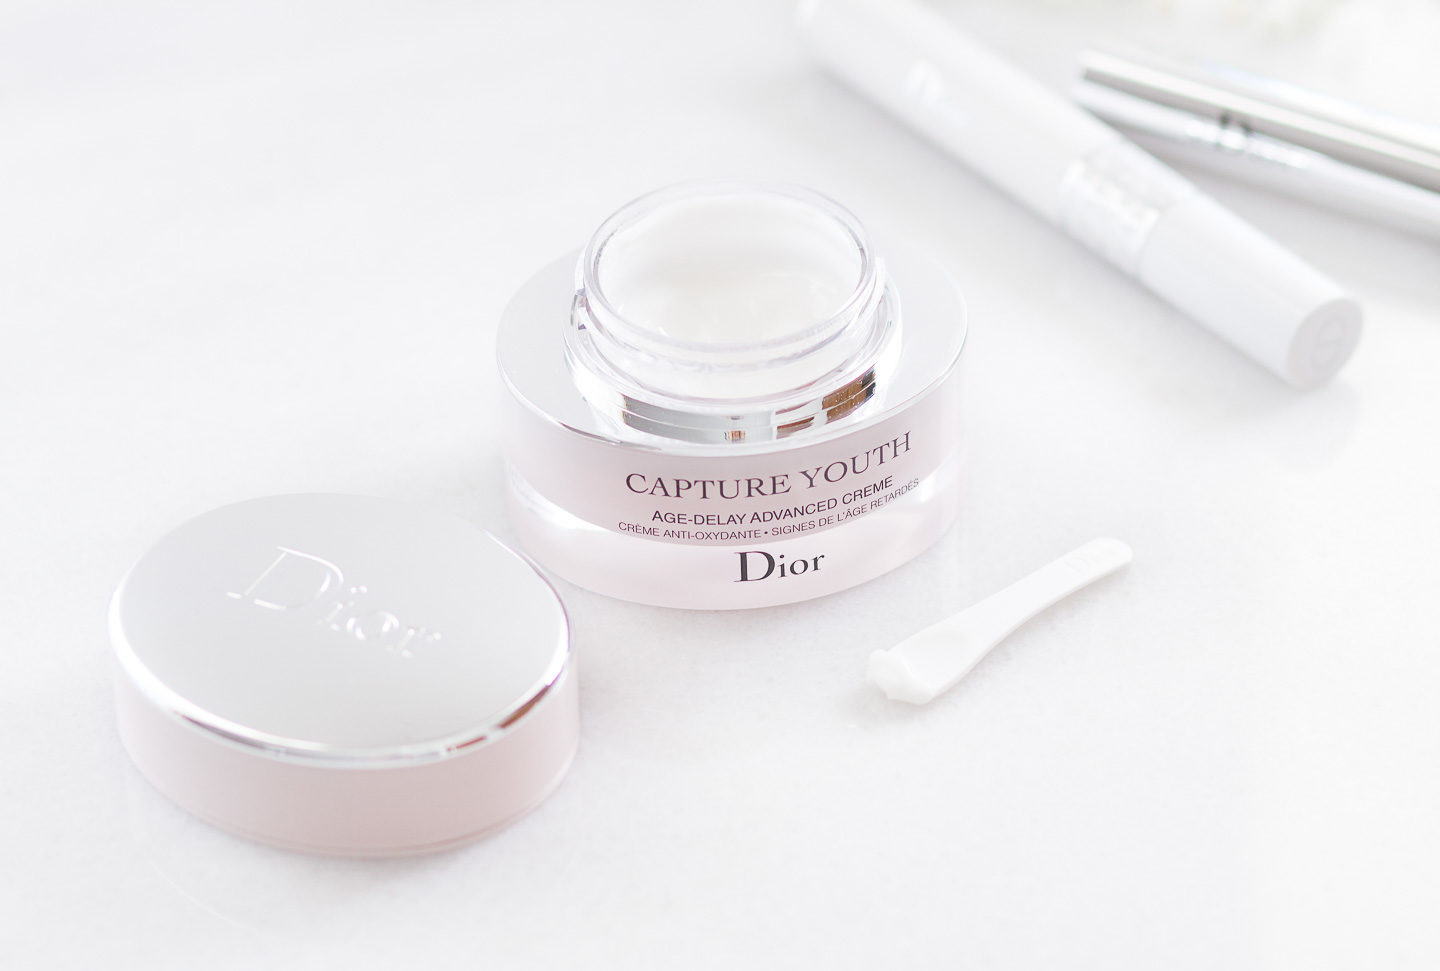 capture youth cream dior review